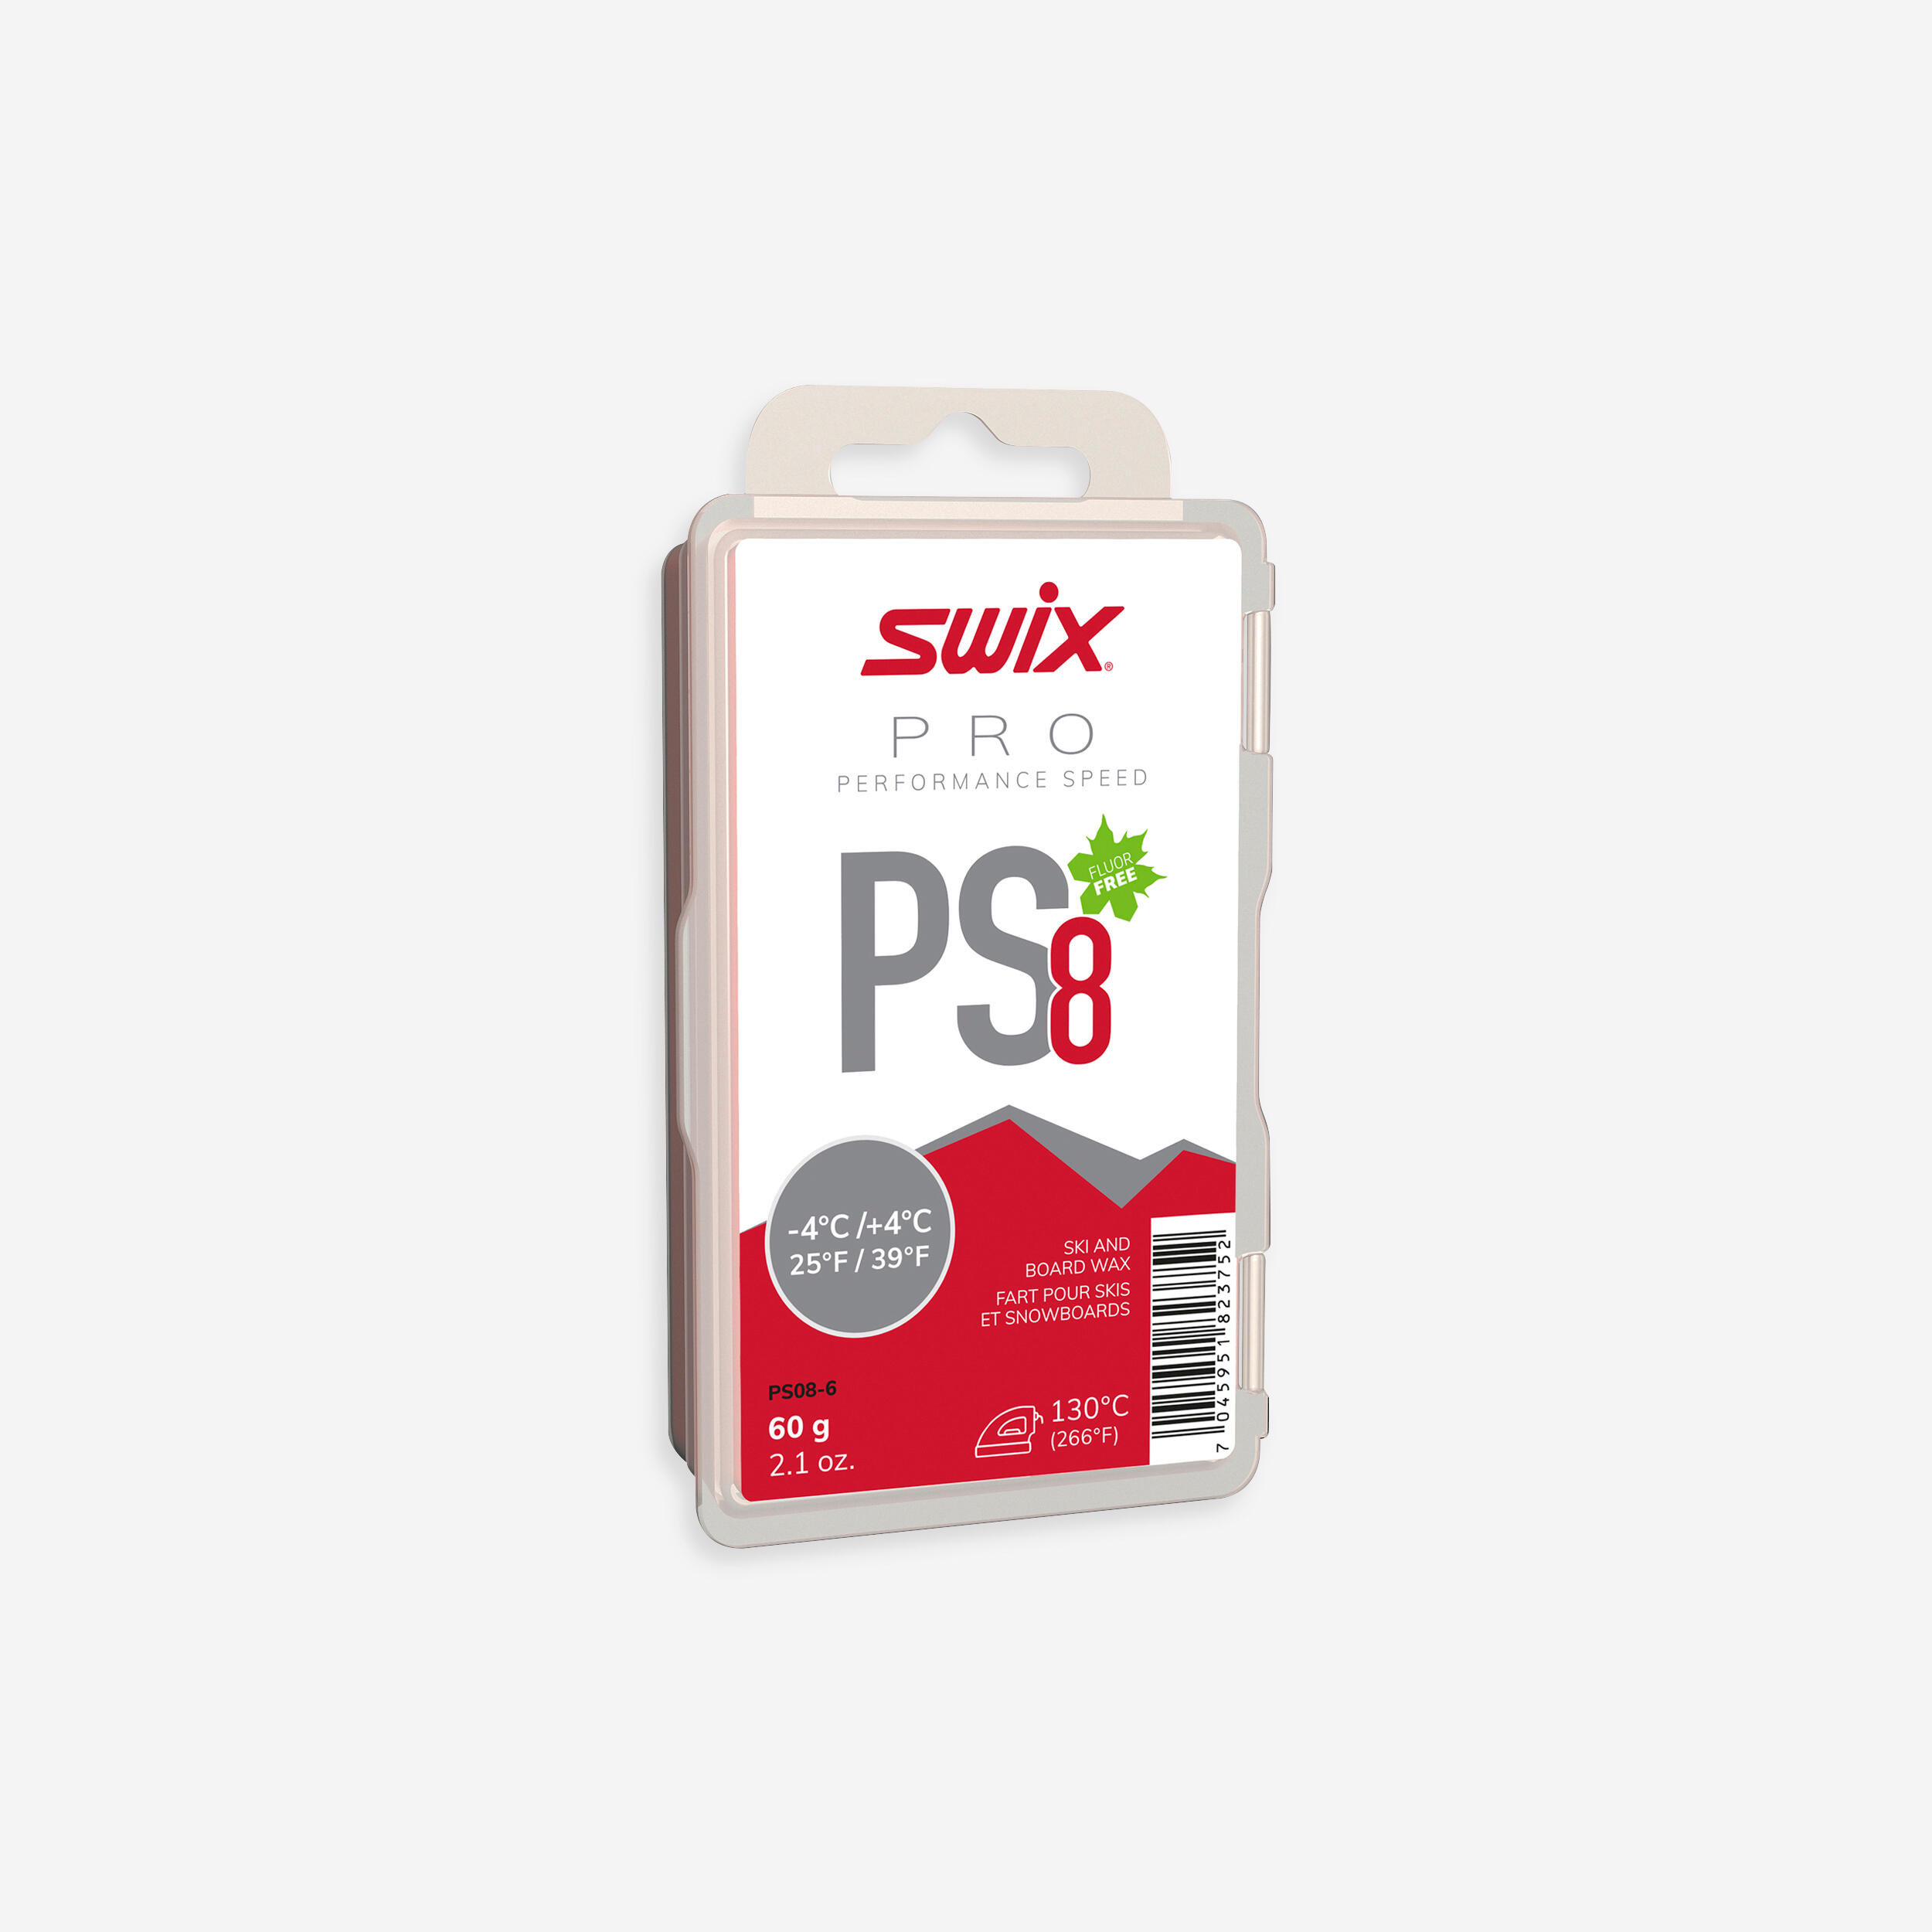 Photos - Other for Winter Sports Swix Wax - Ps8. -4°c/+4°c - 60g Red 